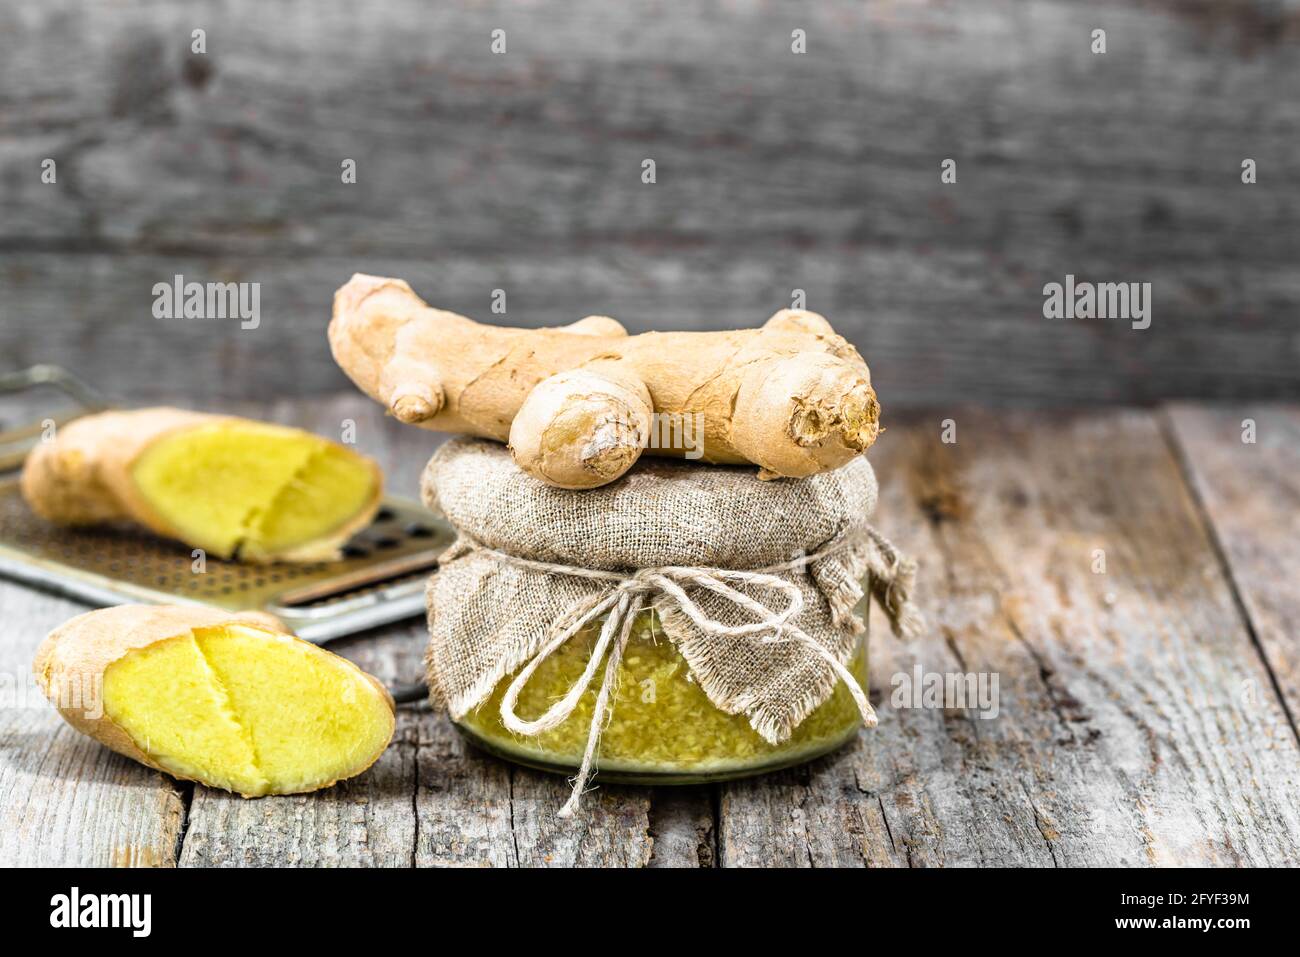 Grated ginger in a glass jar, seasoning ingredients, medicinal spice for self treatment Stock Photo